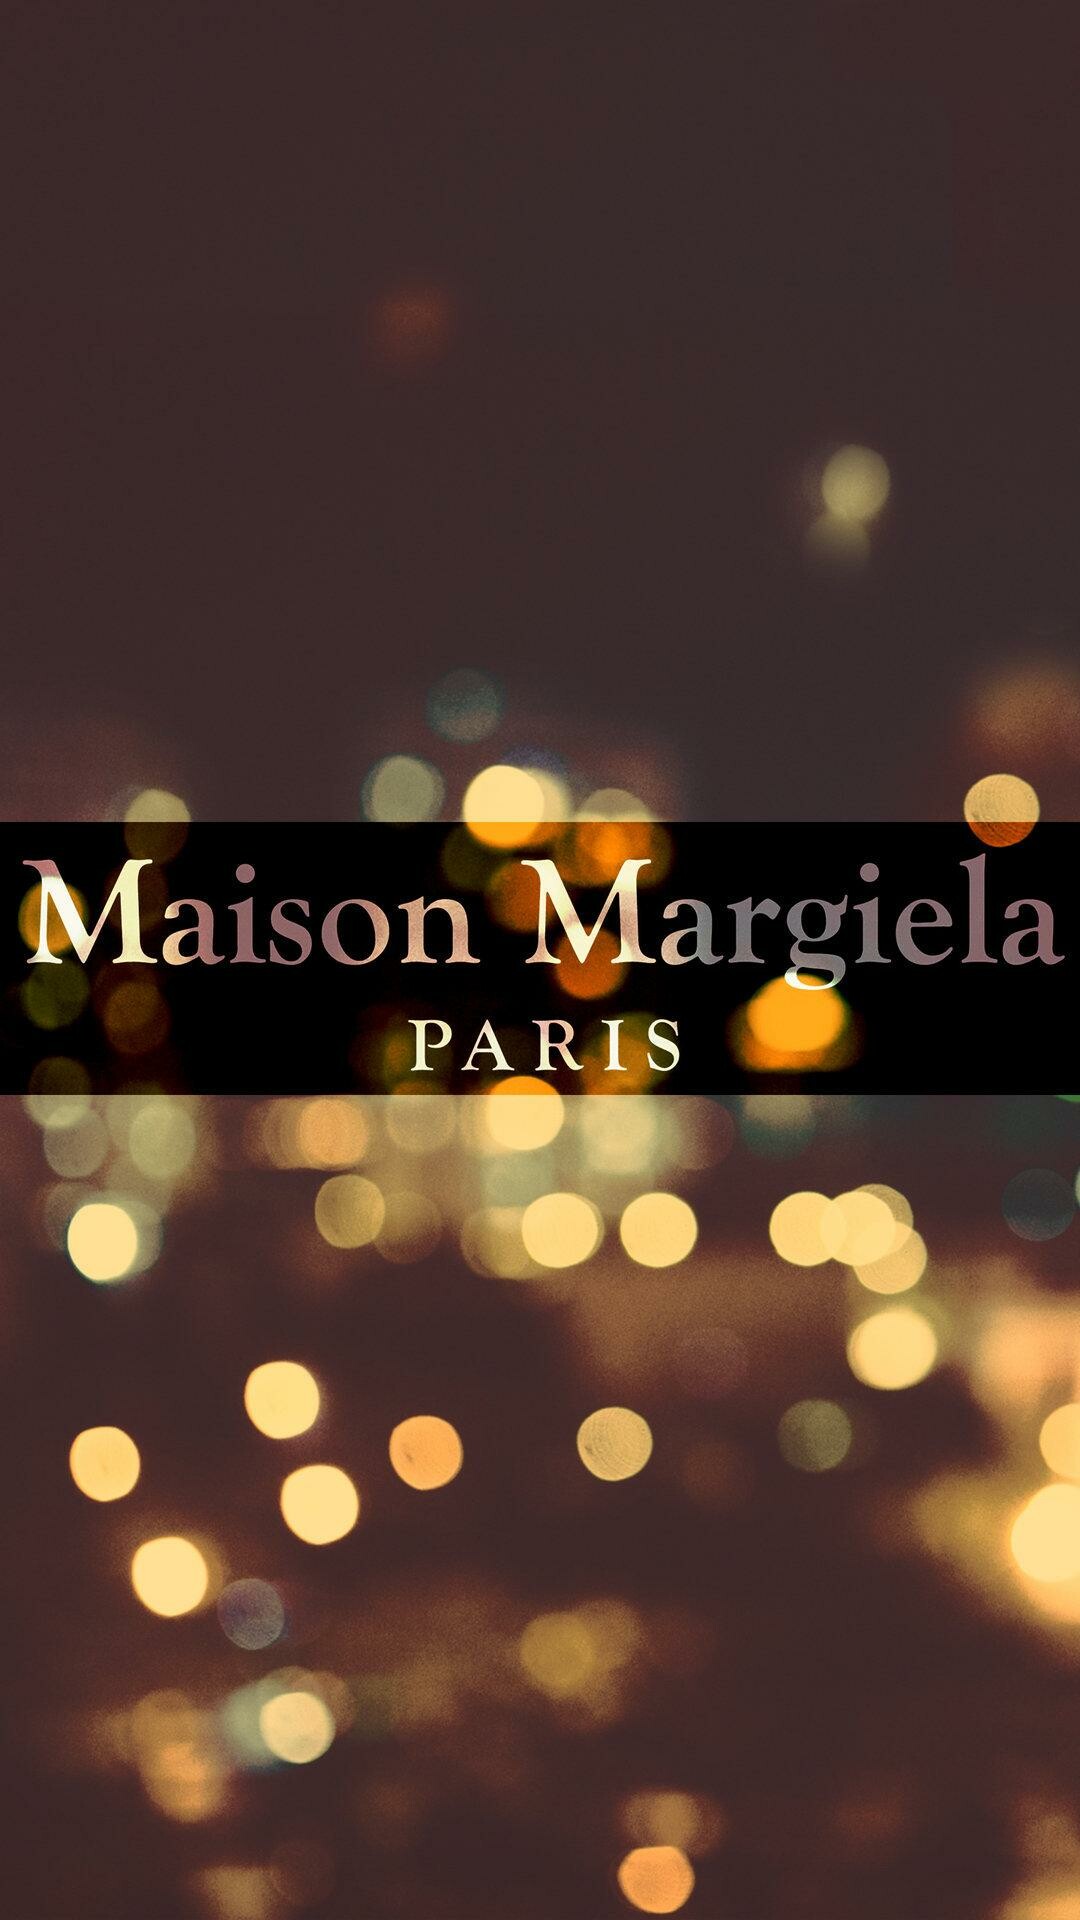 Maison Margiela: Fashion brand, Known for its creative and androgynous designs. 1080x1920 Full HD Background.